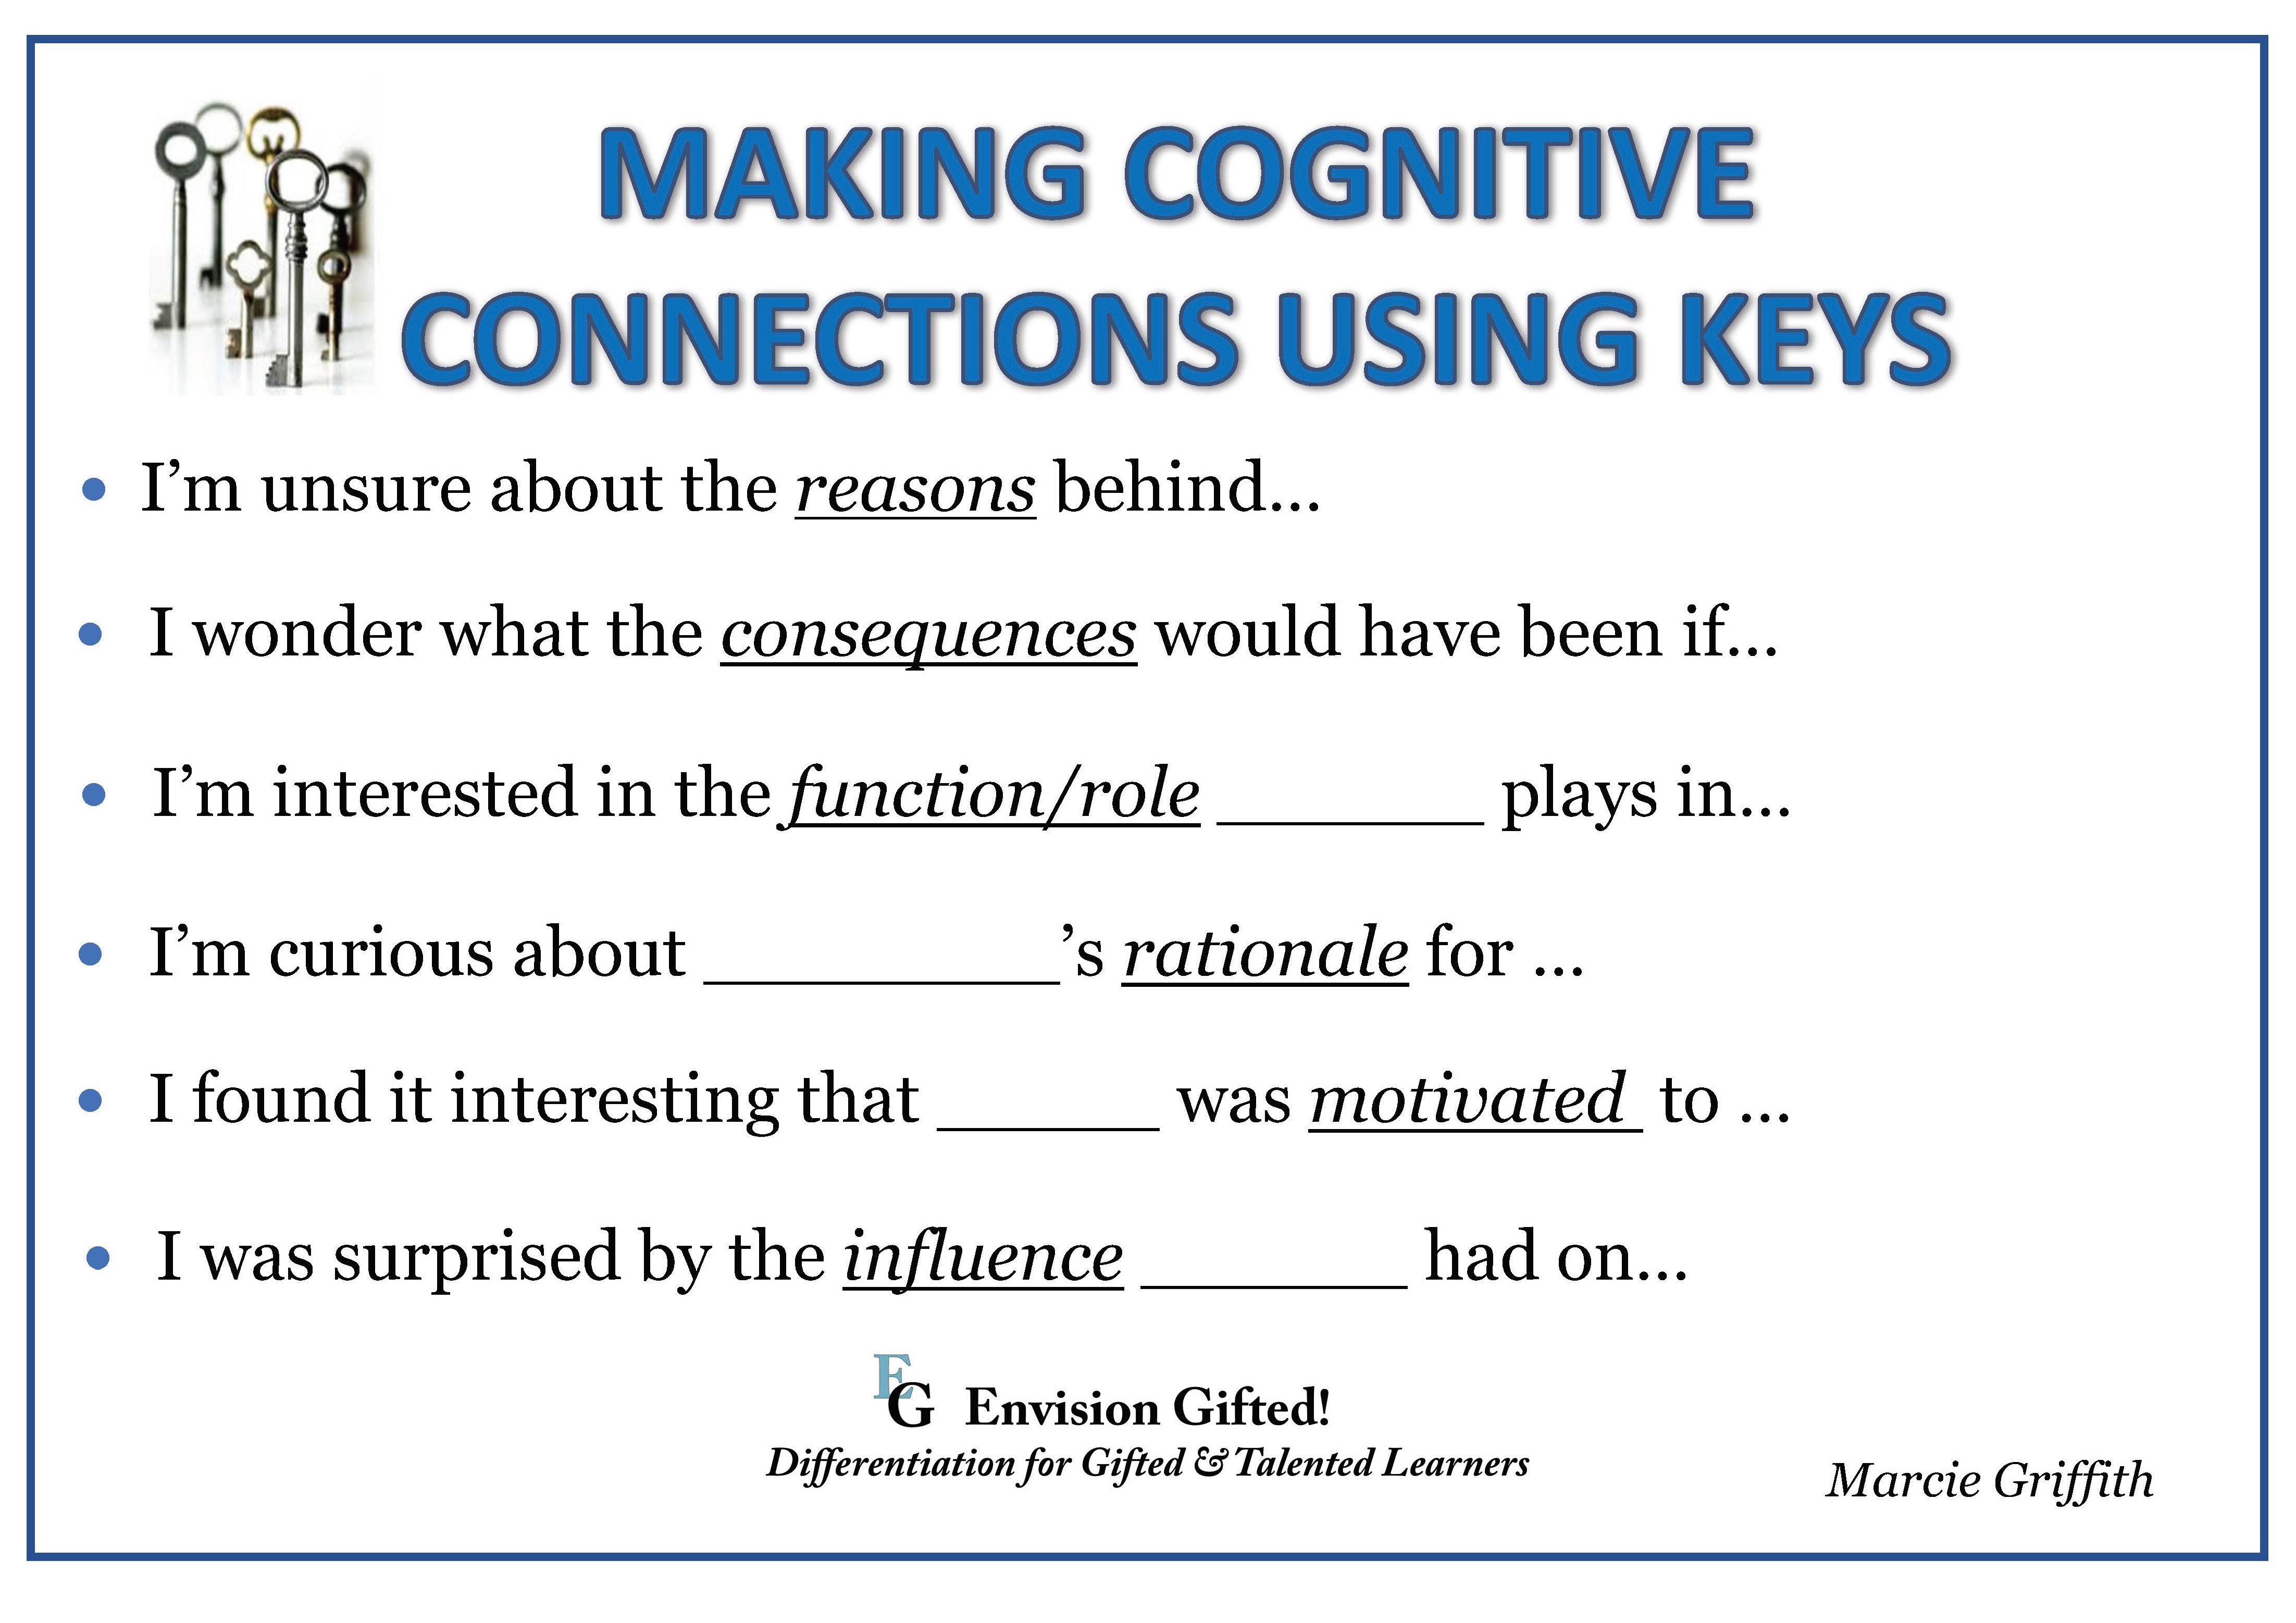 Envision Gifted. Cognitive Connections Keys